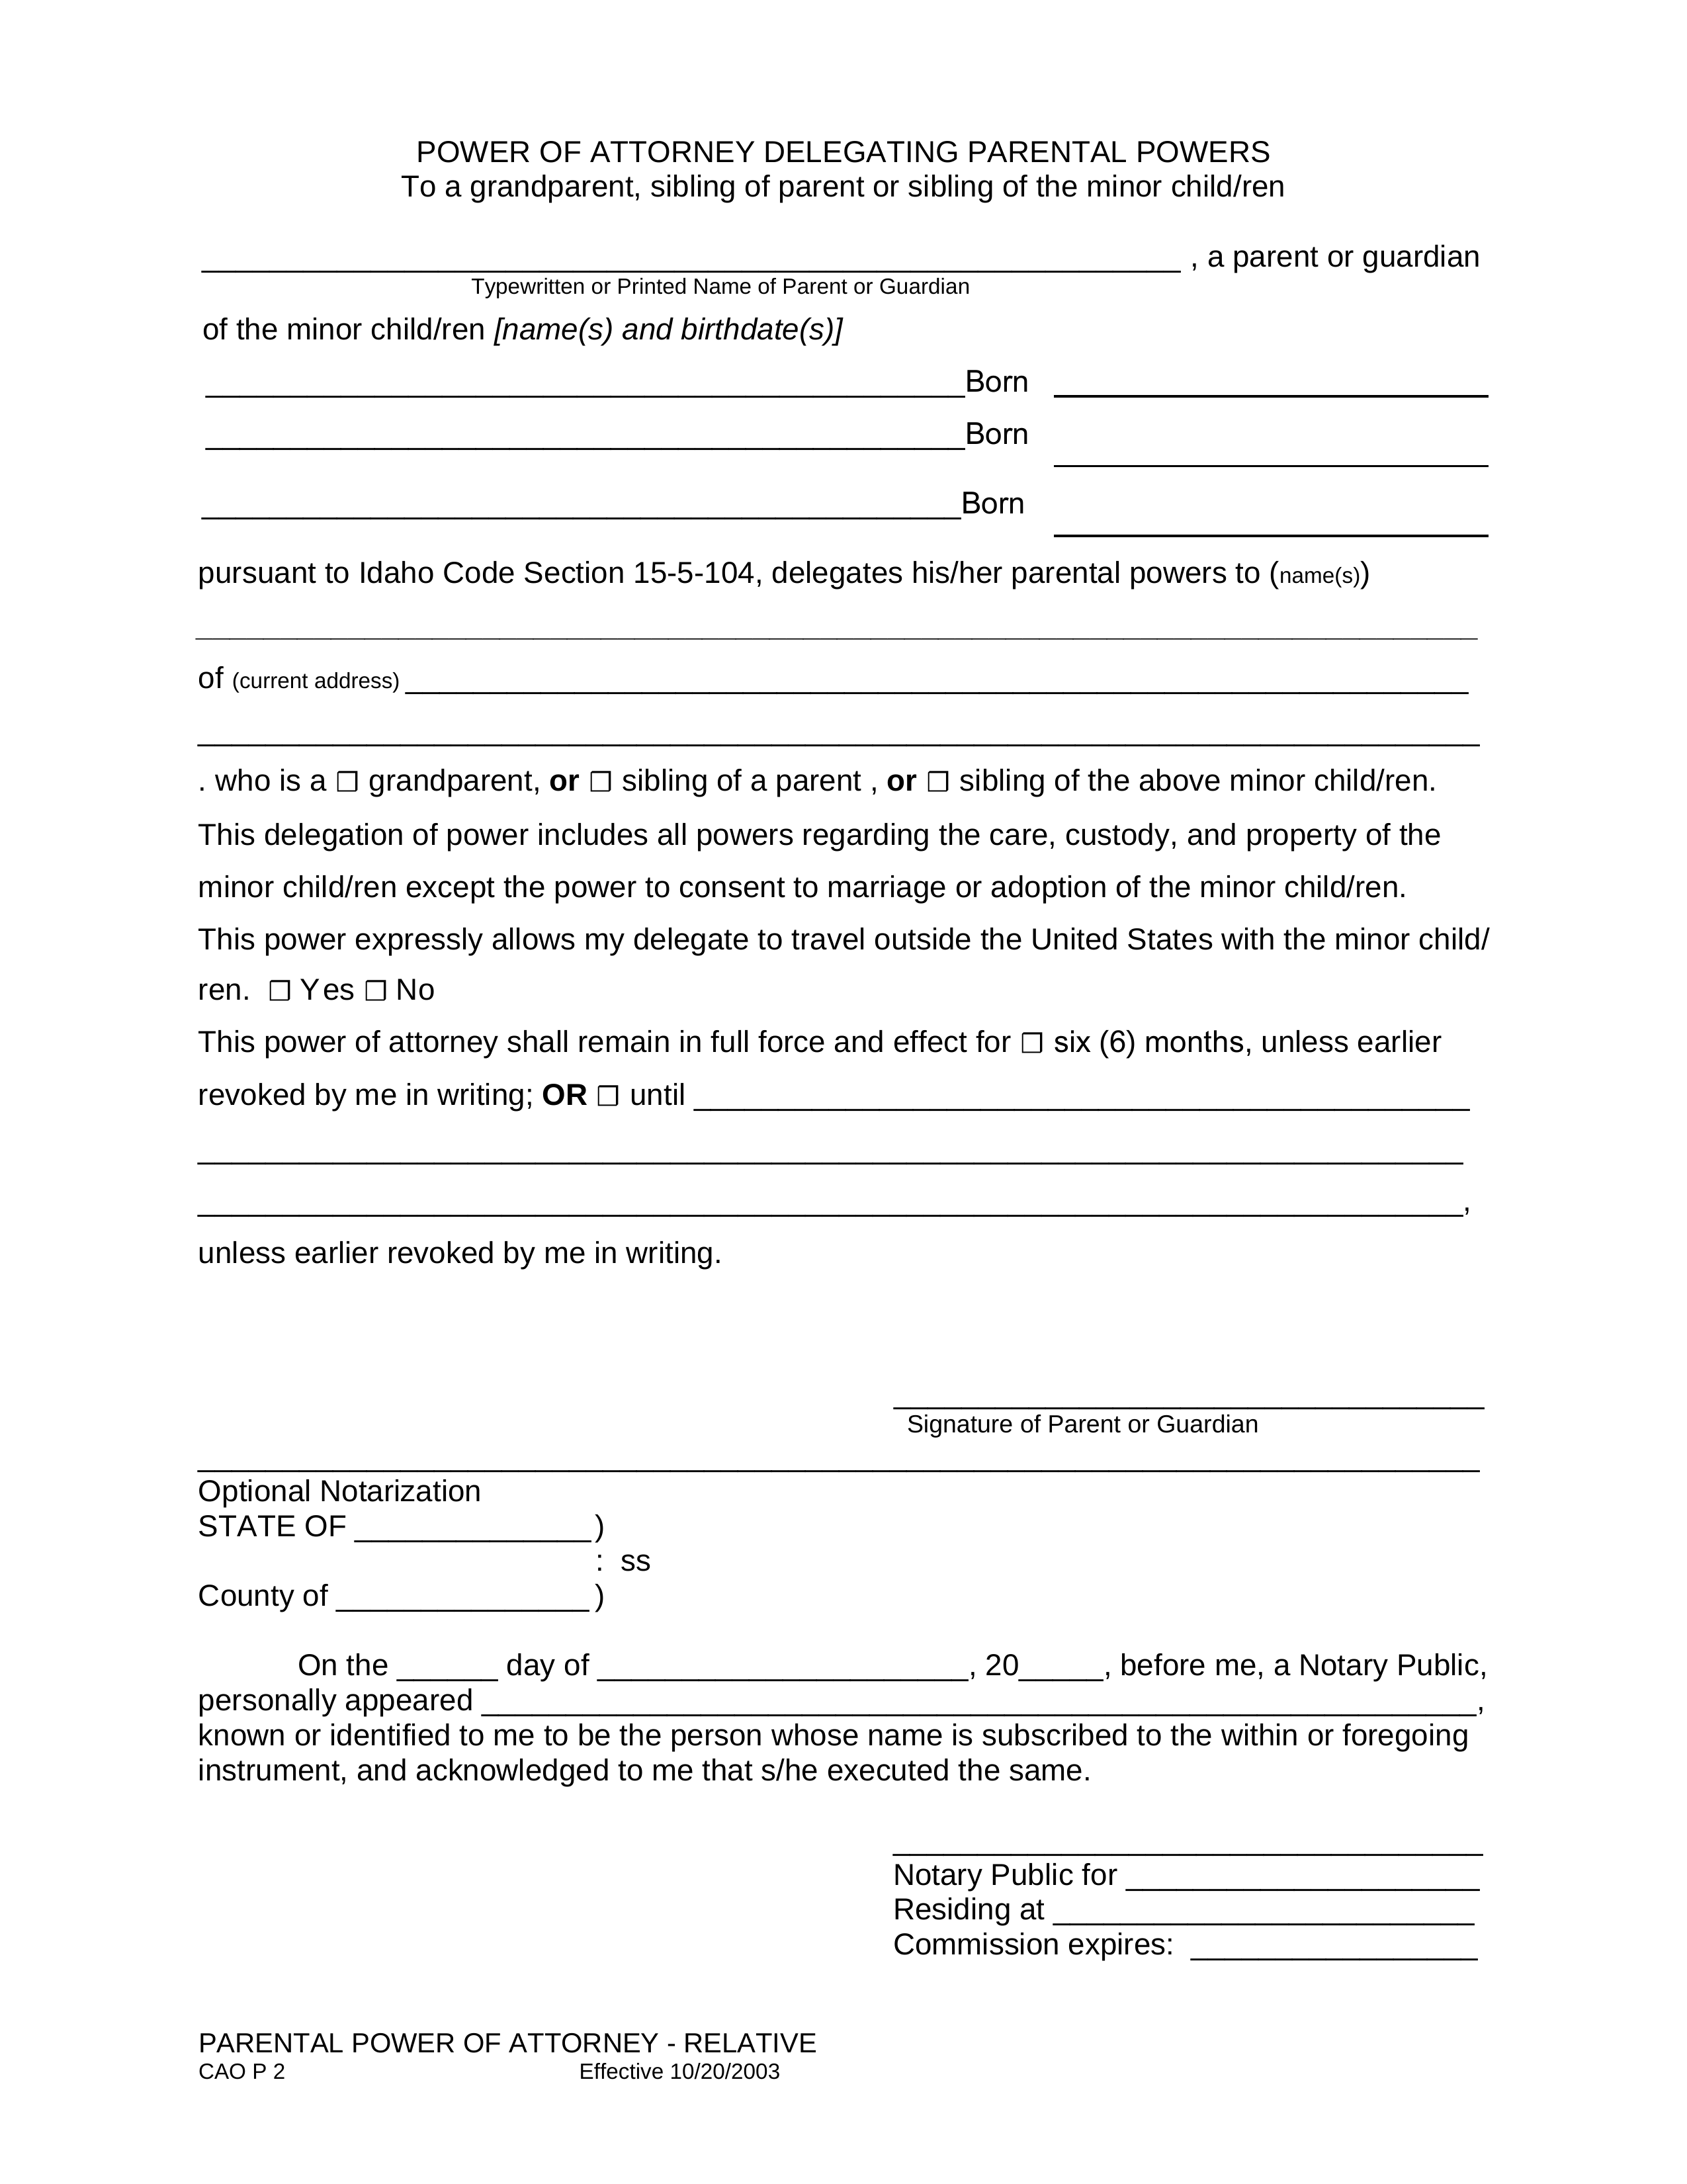 free-printable-power-of-attorney-form-hawaii-printable-forms-free-online